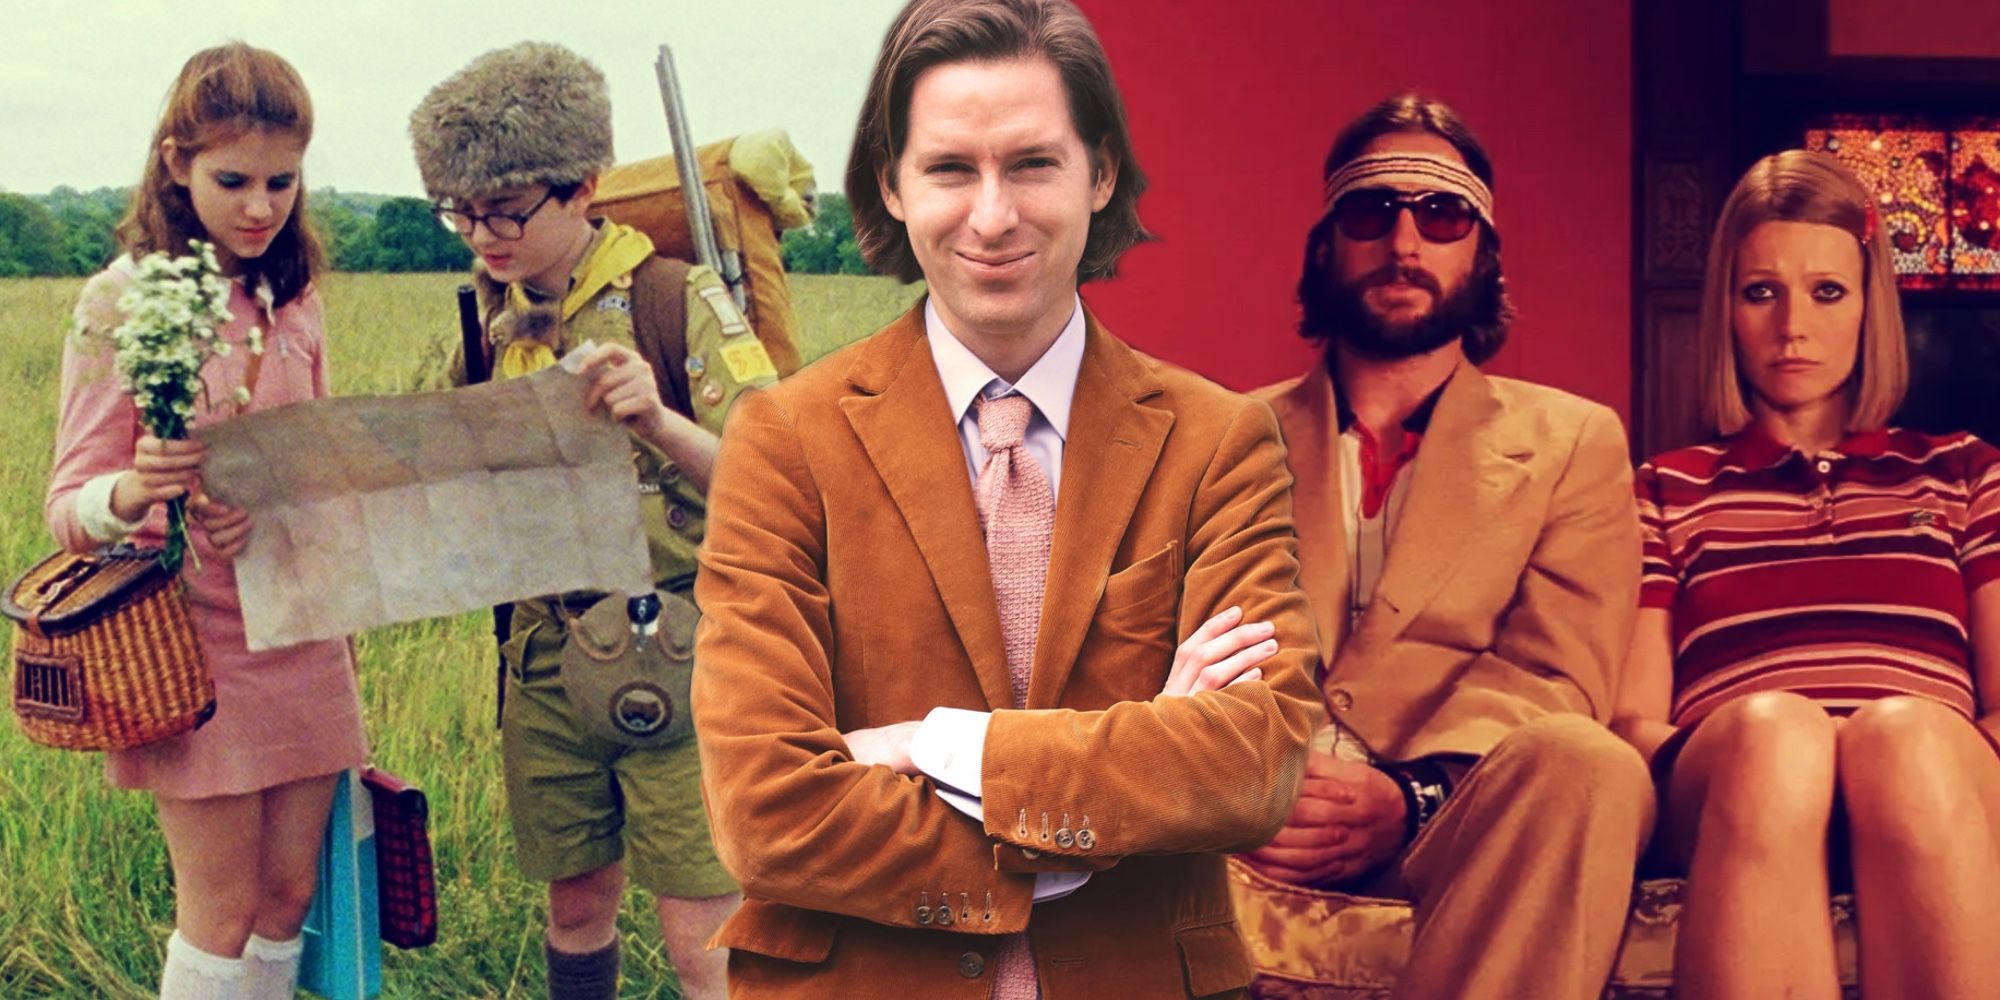 A composite image of Wes Anderson and his movies